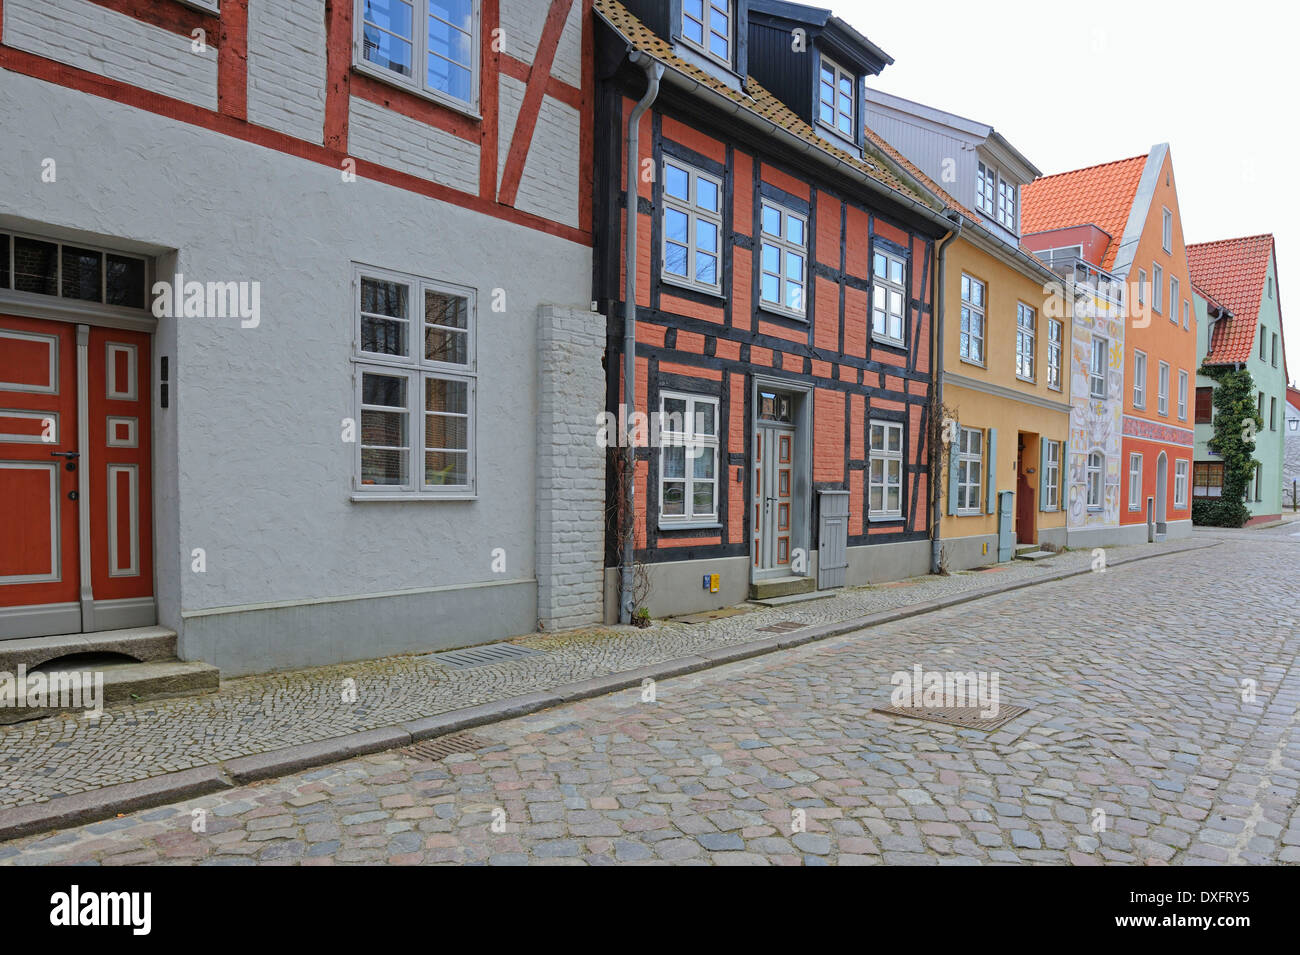 Renovated half-timbered houses, historic town centre, Hanseatic City of Stralsund, Mecklenburg-Western Pomerania, Germany Stock Photo